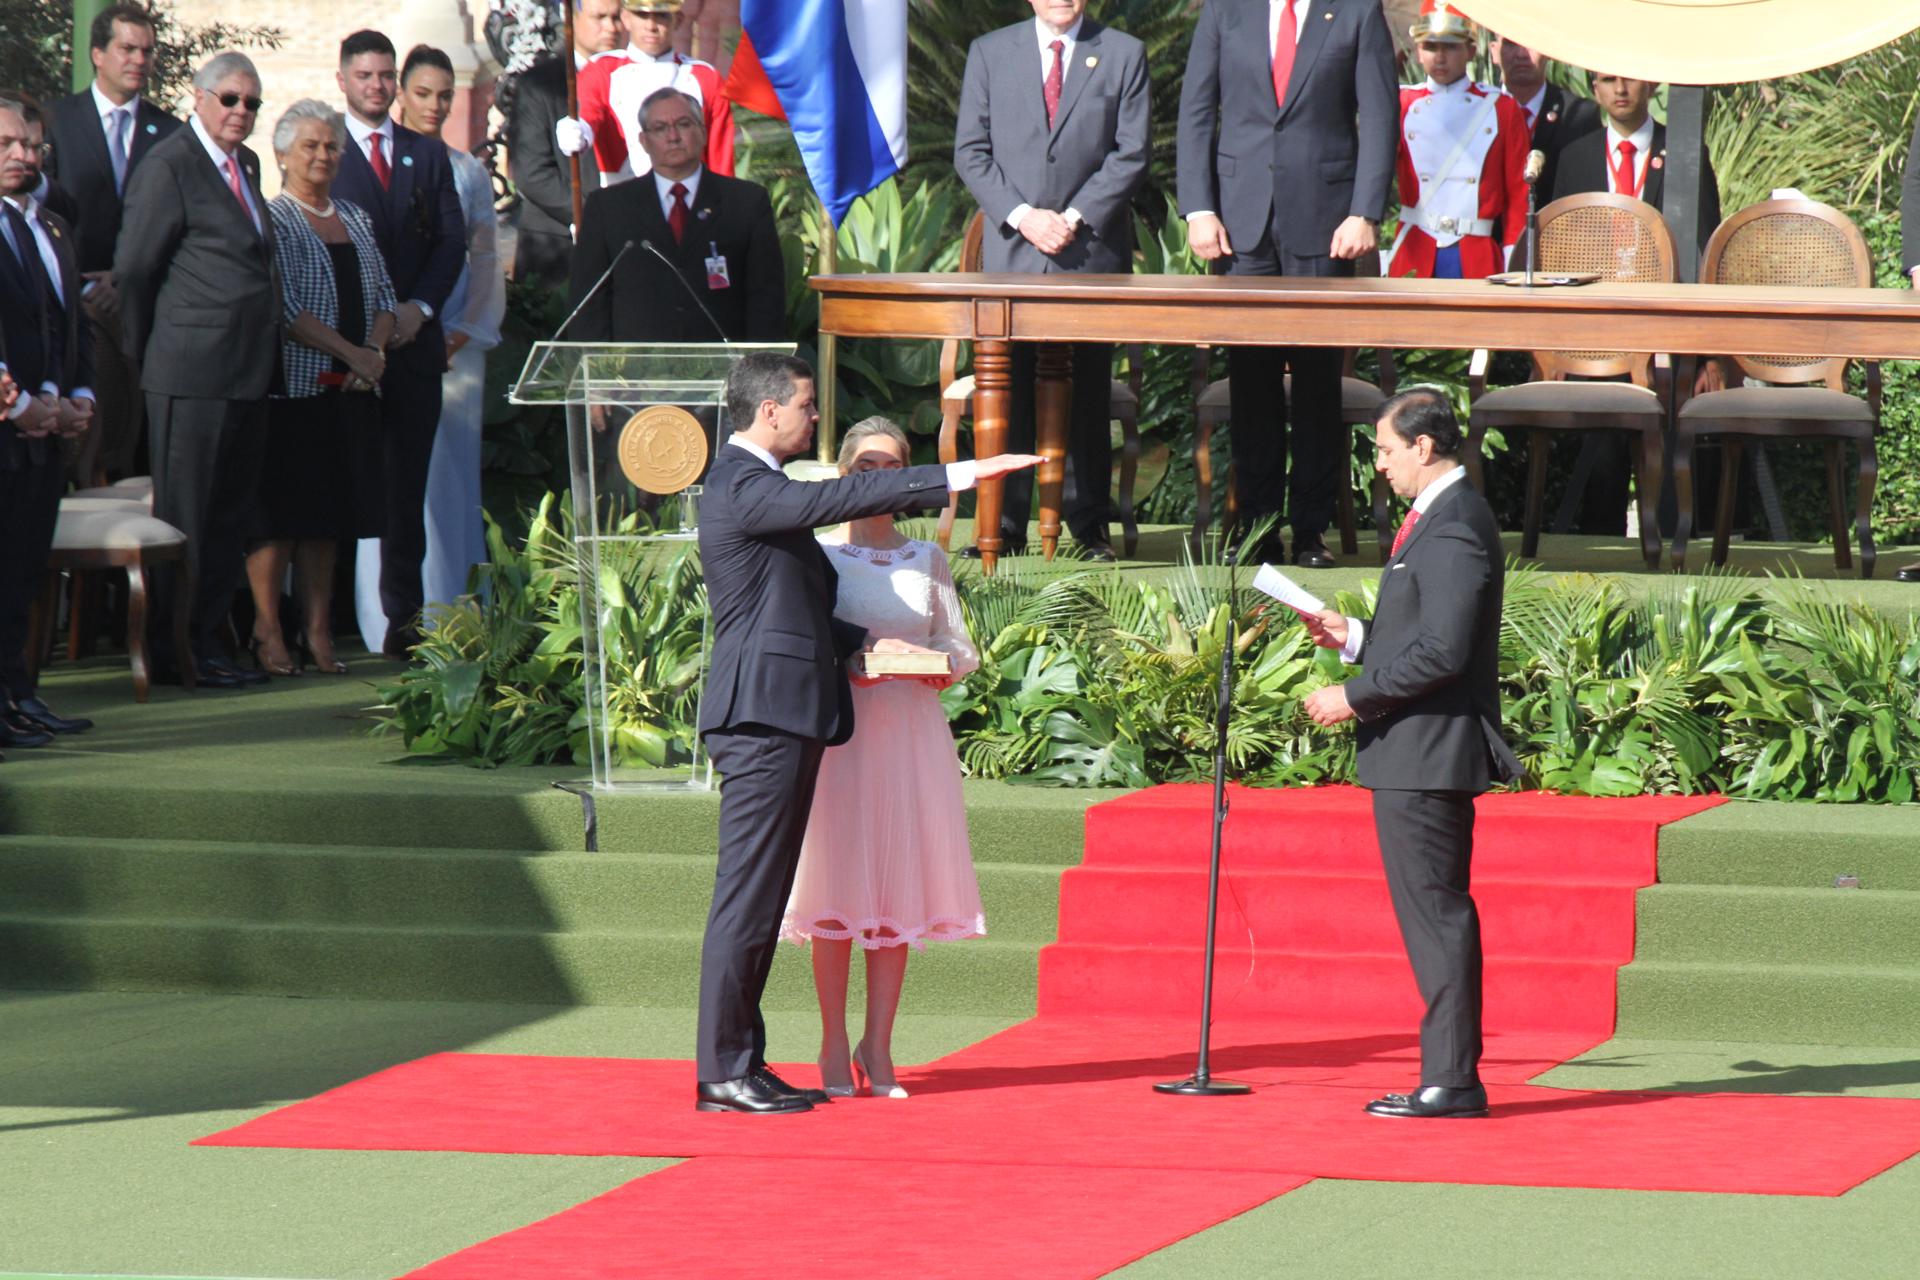 Santiago Peña is sworn in as Paraguay's new president in an inauguration ceremony on 15 August 2023 in Asuncion. EFE/Christian Alvarenga